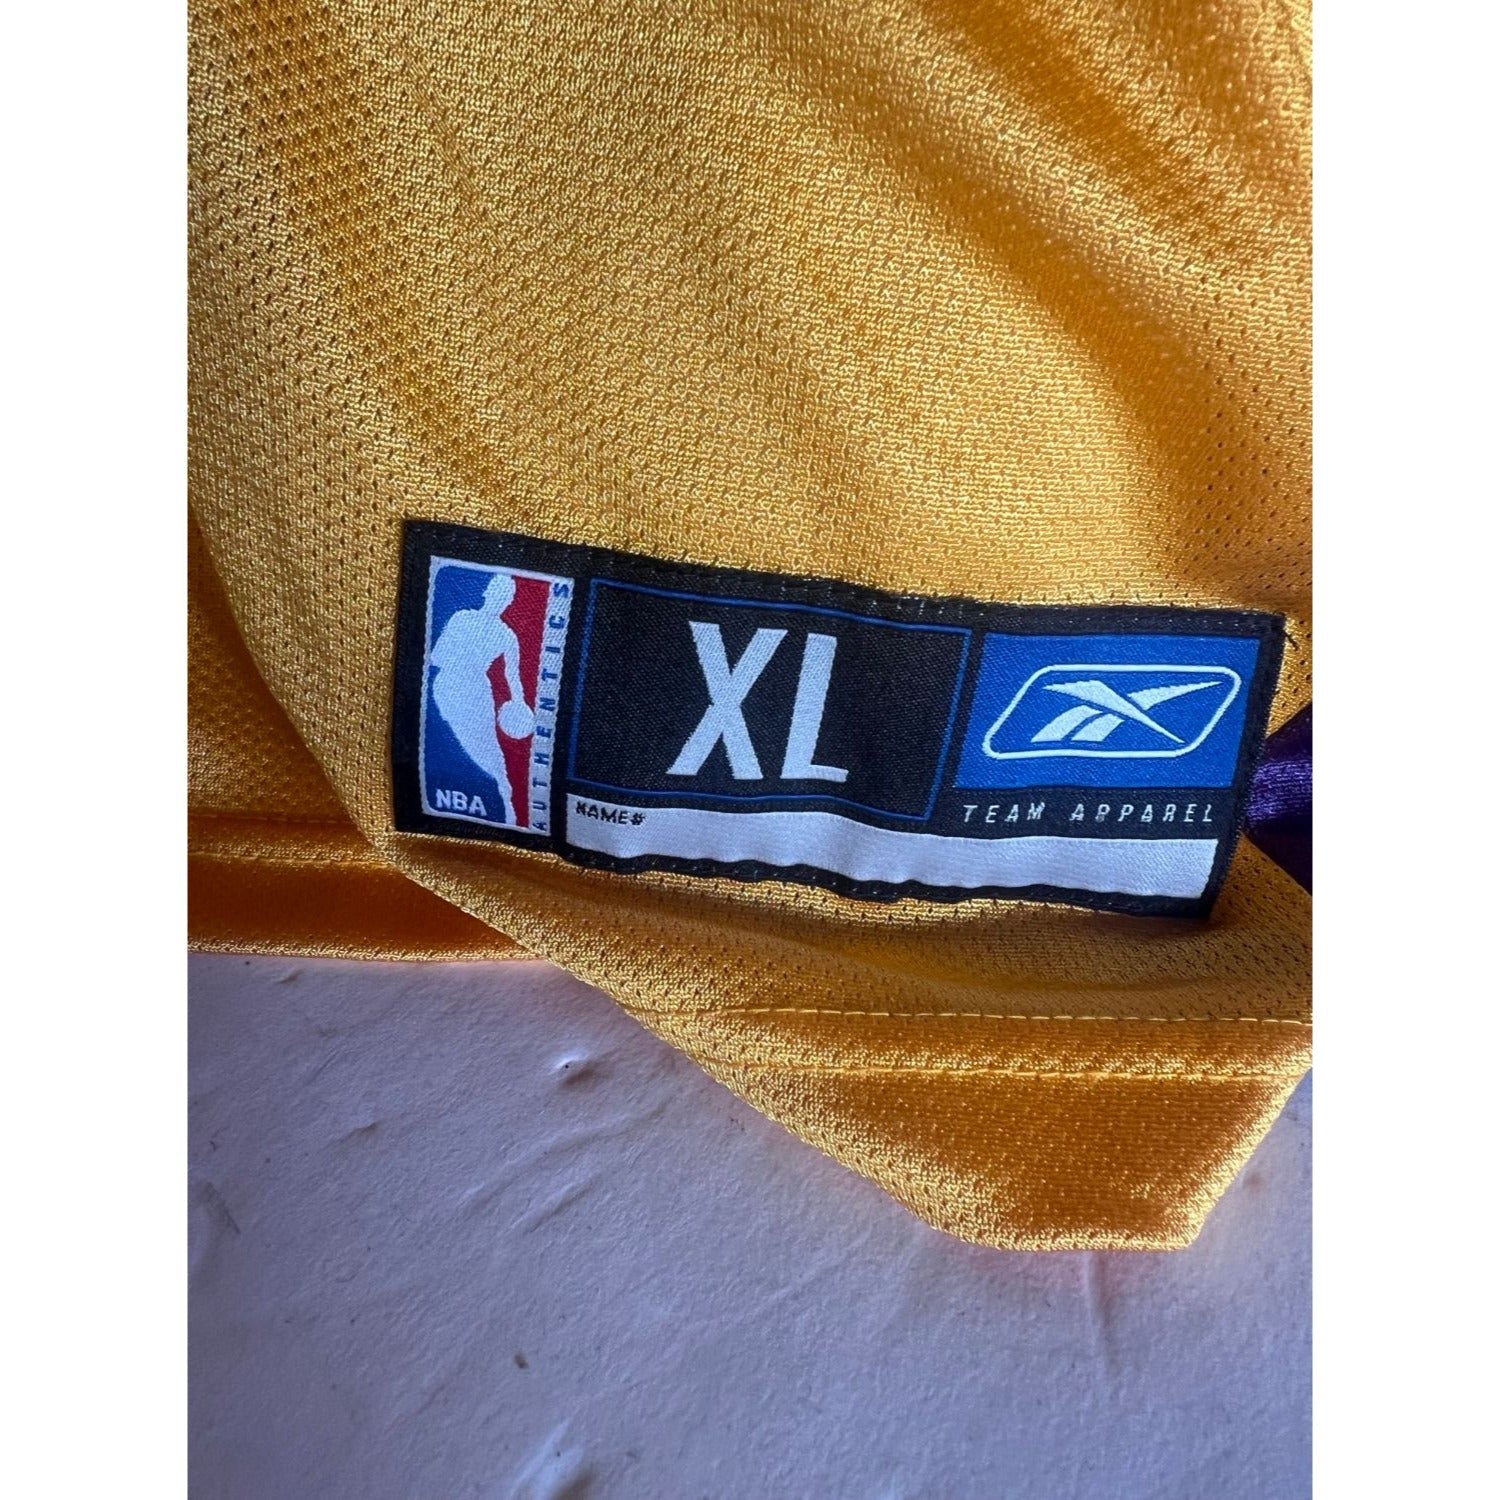 Kobe Bryant 'Mamba Out' signed and inscribed Los Angeles Lakers sixe XL Reebok jersey signed with proof